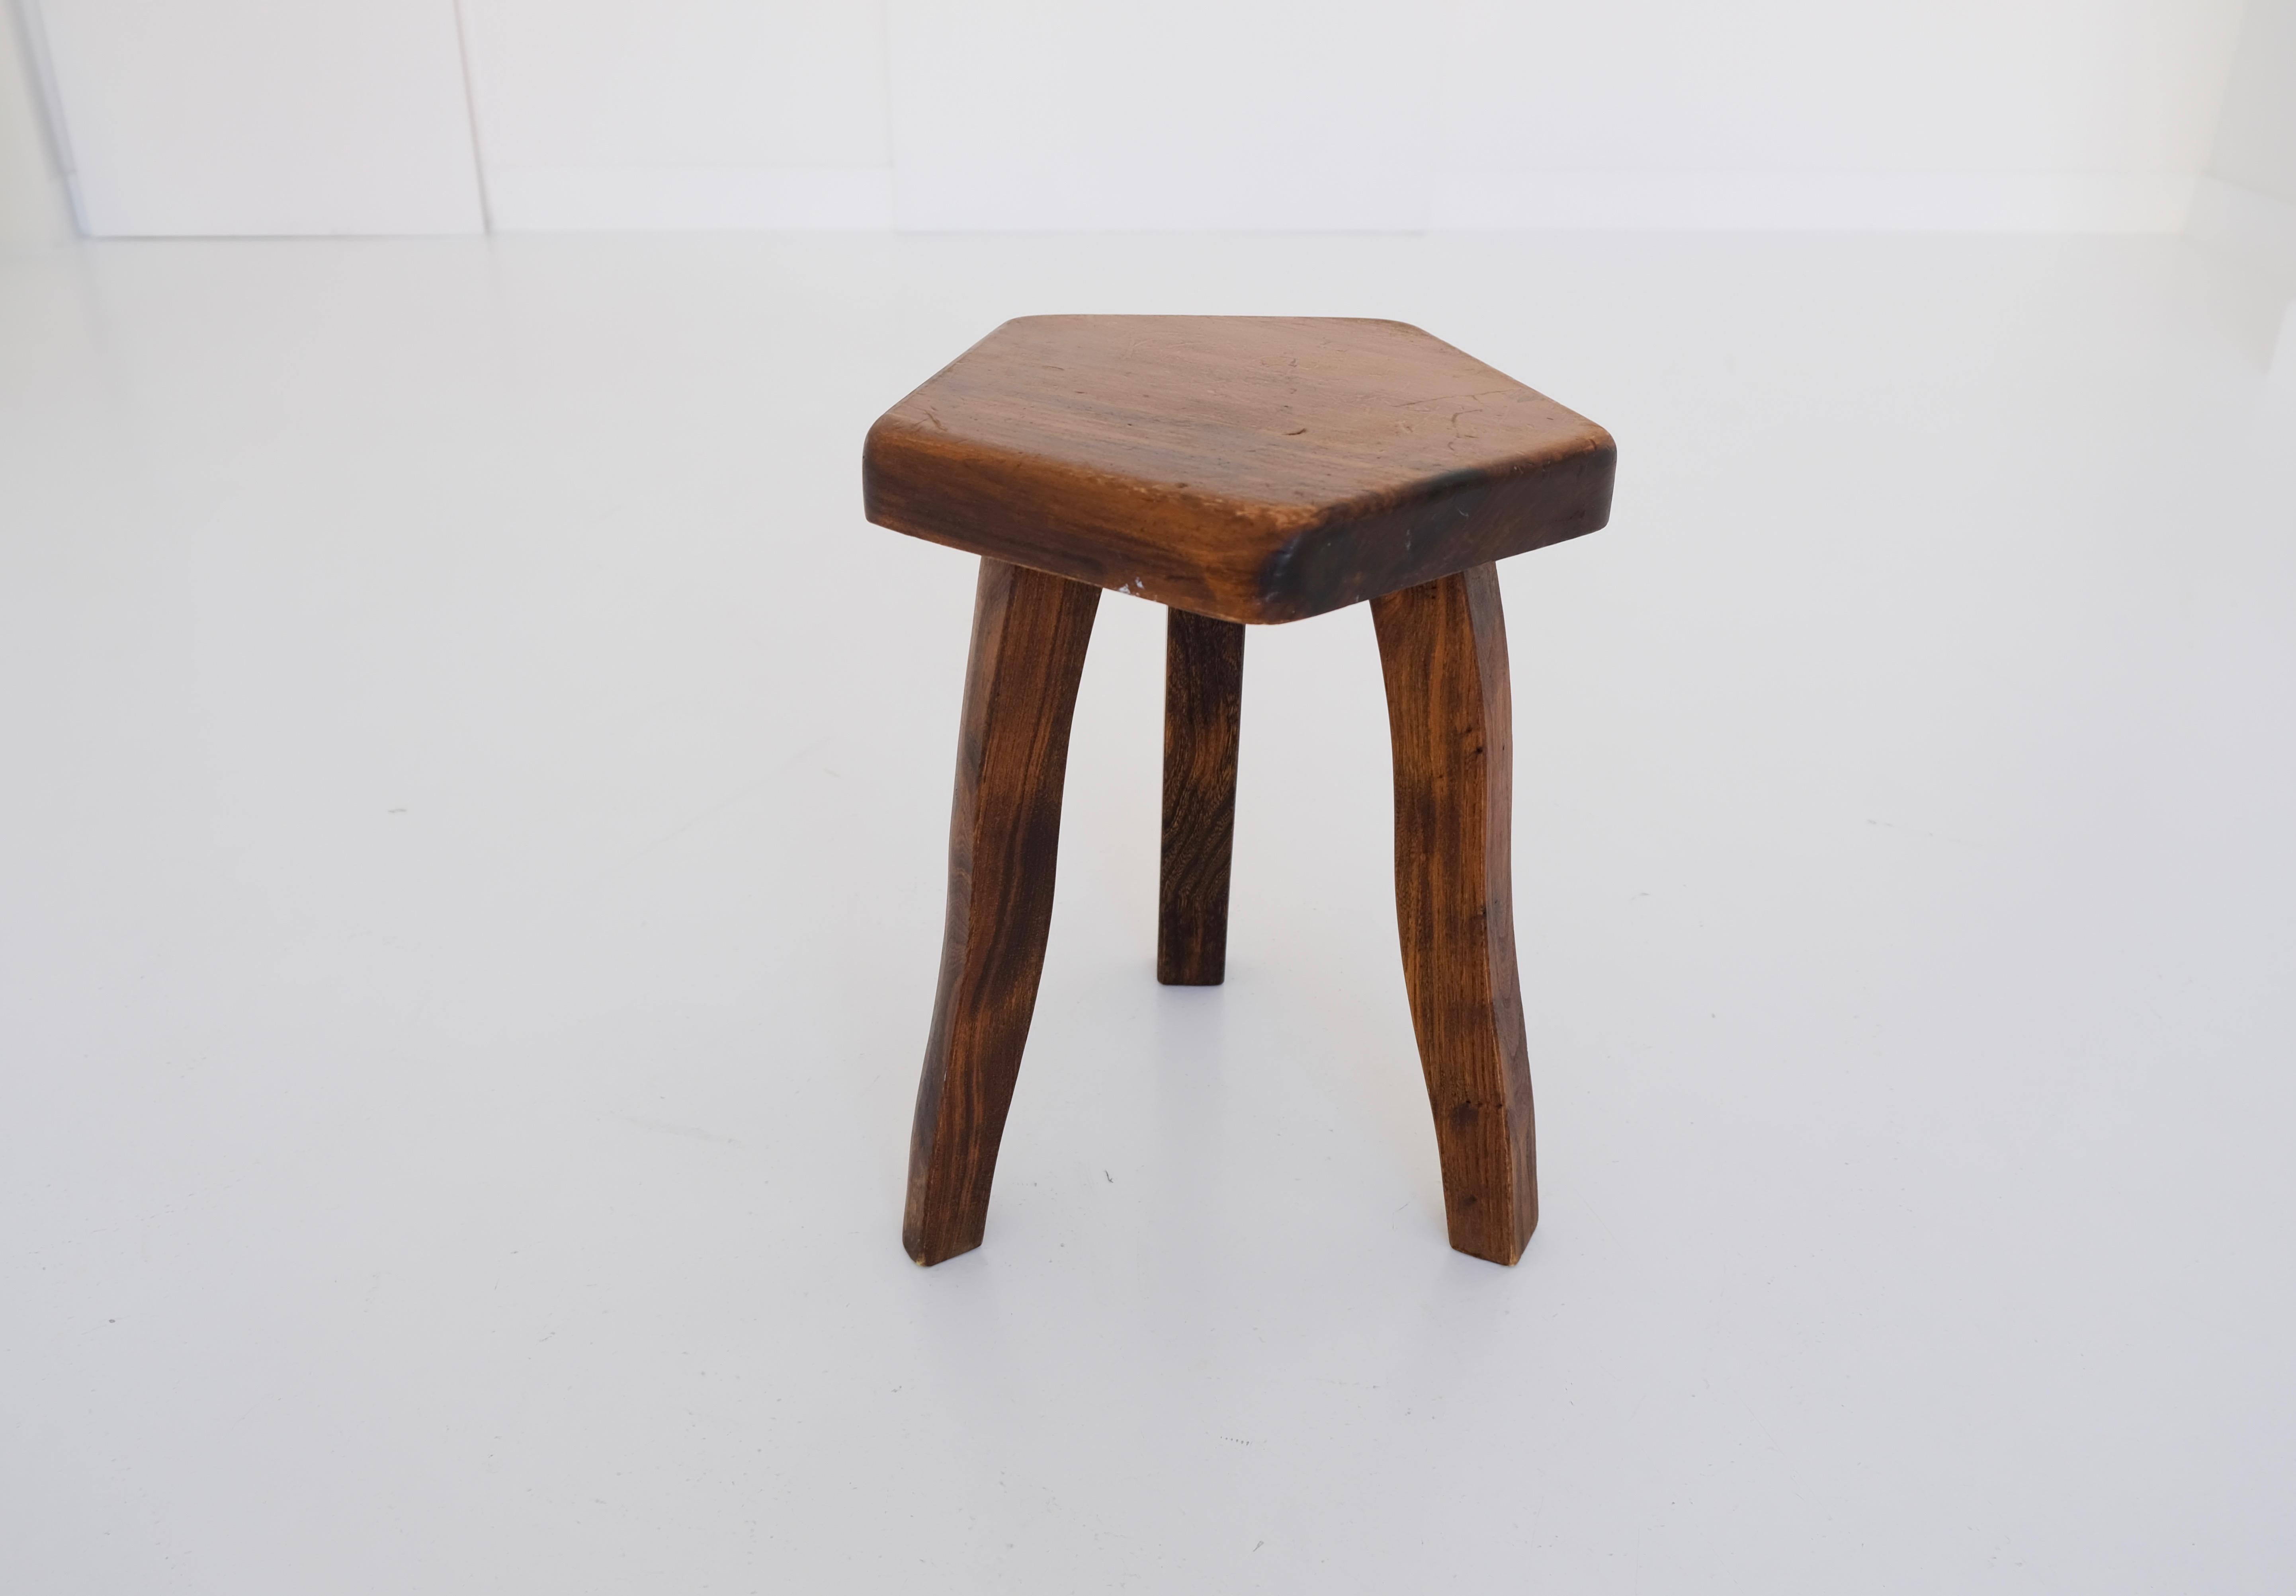 The solid stool or tripod is made of stained elm wood and sculpturally crafted by hand. Rustic, minimalistic, brutalistic – bringing a sense of organic power to every understated design interior.